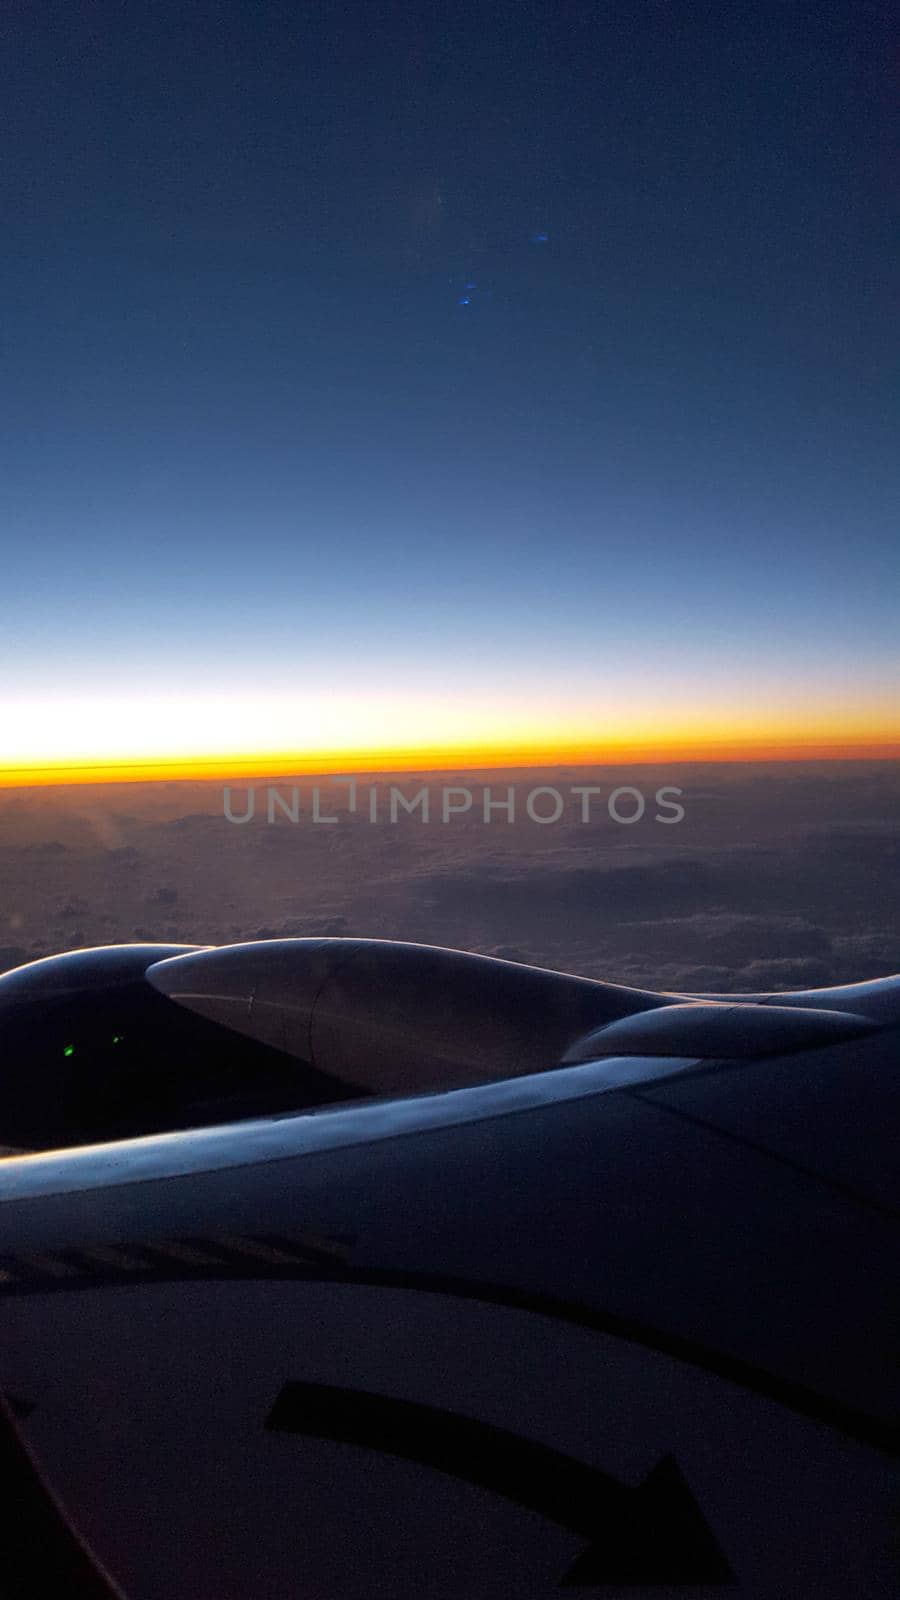 Sunrise light over the world full of clouds with Airplane Jet Wing.